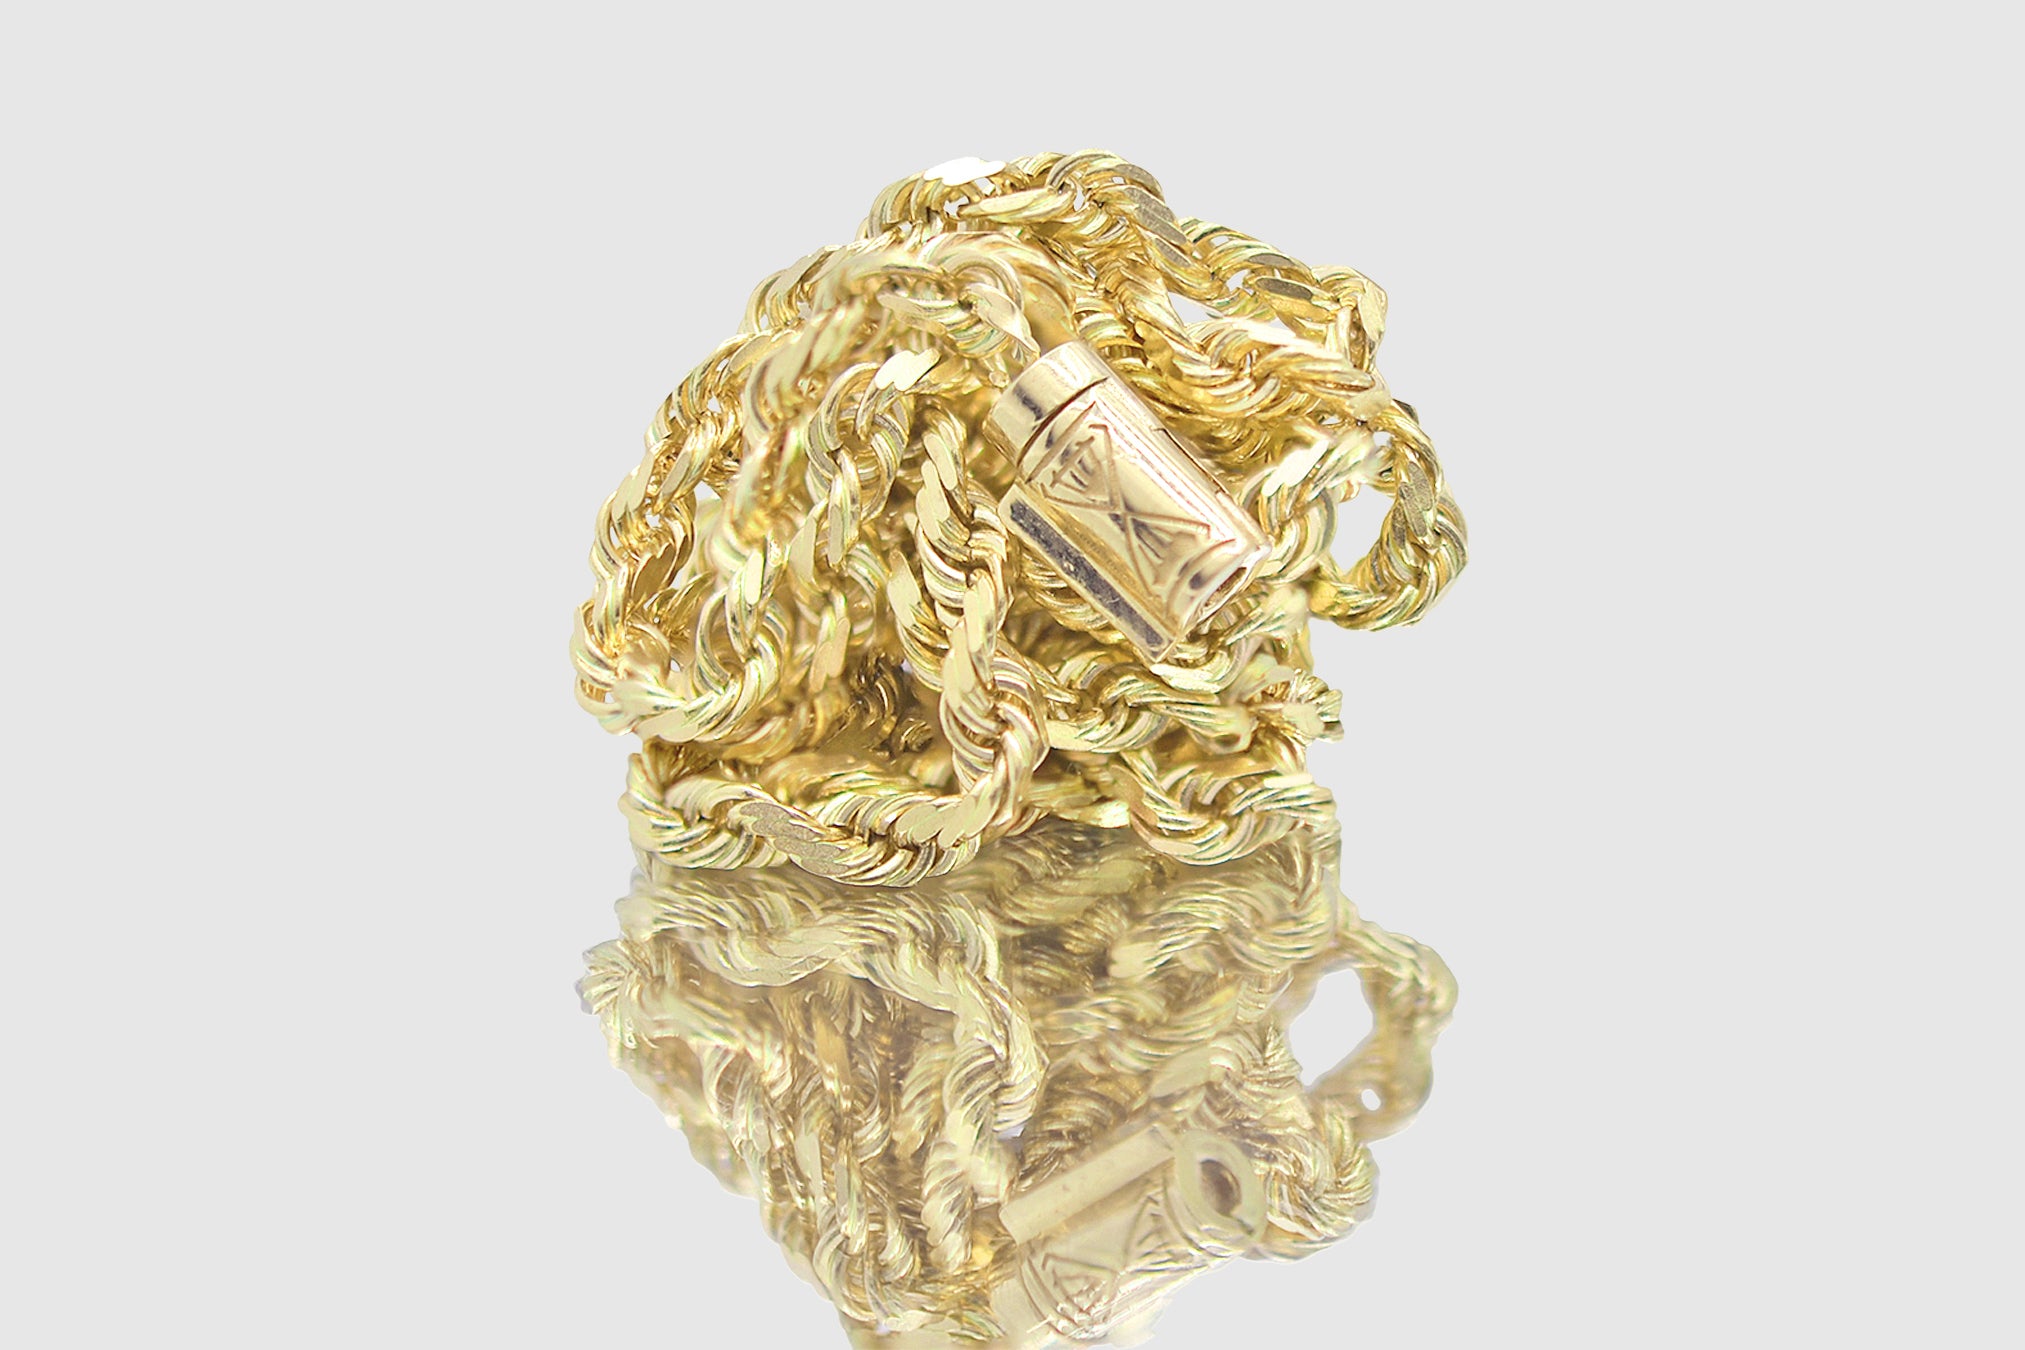 14k Gold Rope Chain, Sailor Lock Clasp Necklace